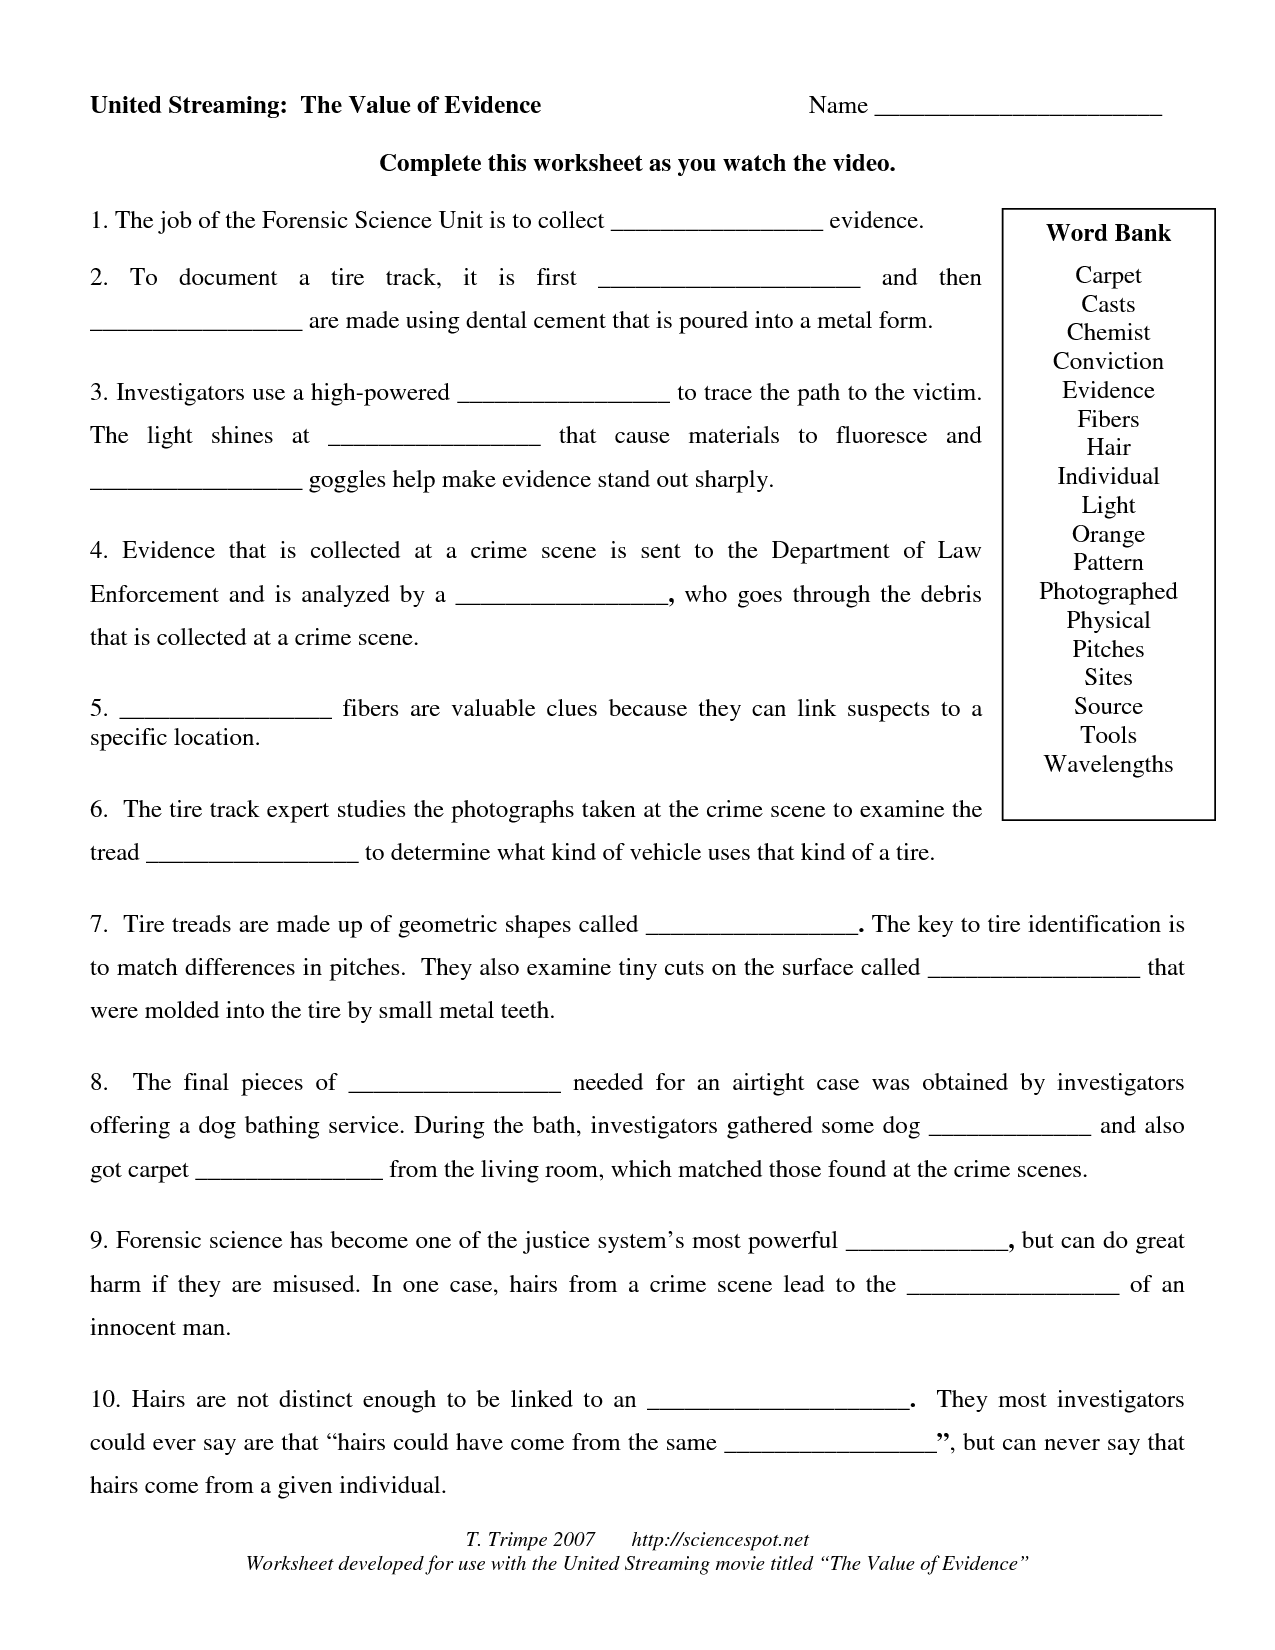 14-best-images-of-hair-evidence-worksheet-activity-forensic-science